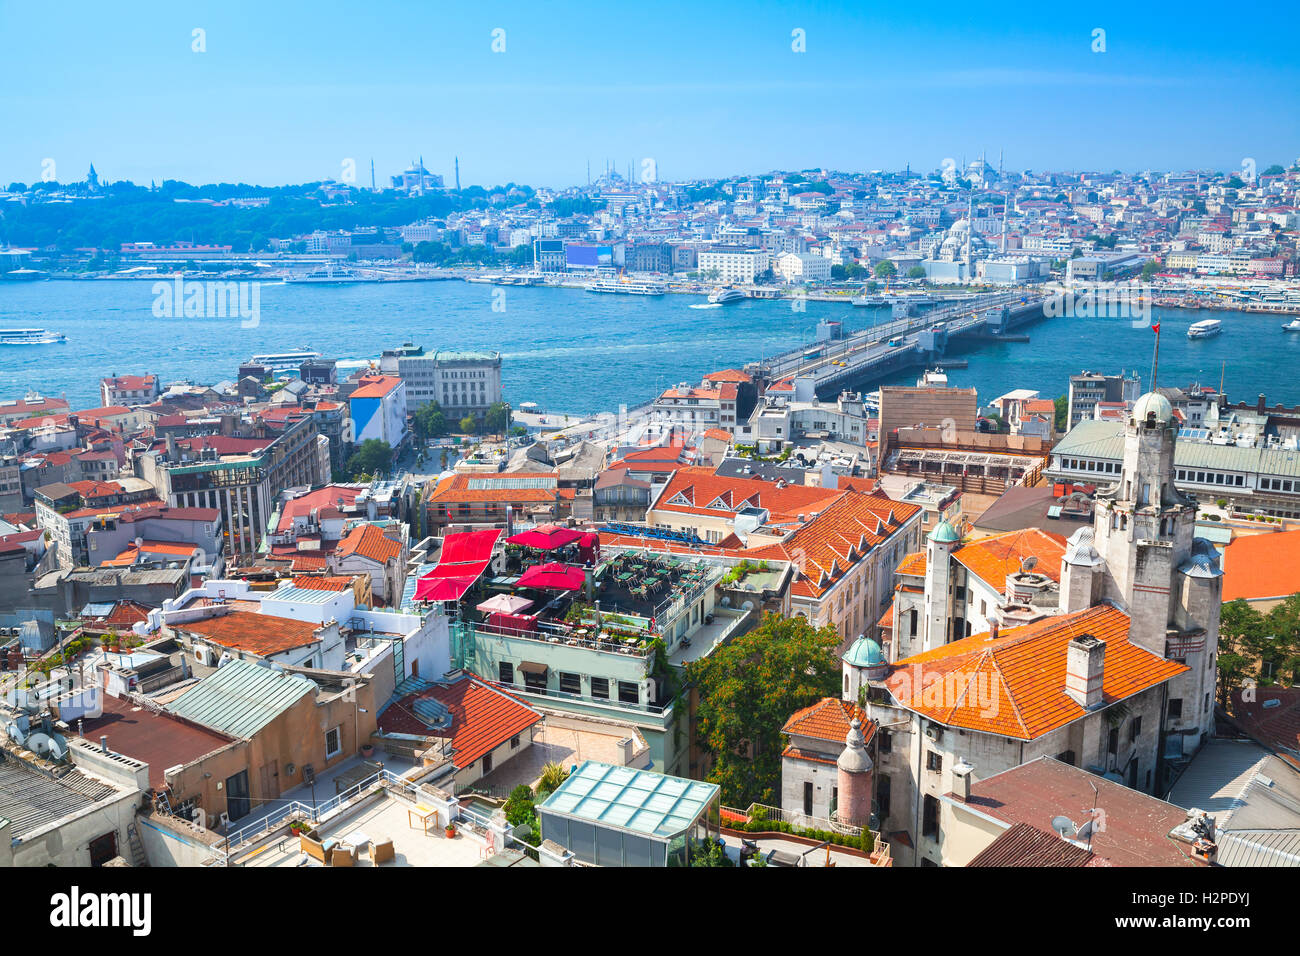 Istanbul, Turkey. Summer cityscape with bridge over Golden Horn a major urban waterway and the primary inlet of the Bosphorus Stock Photo